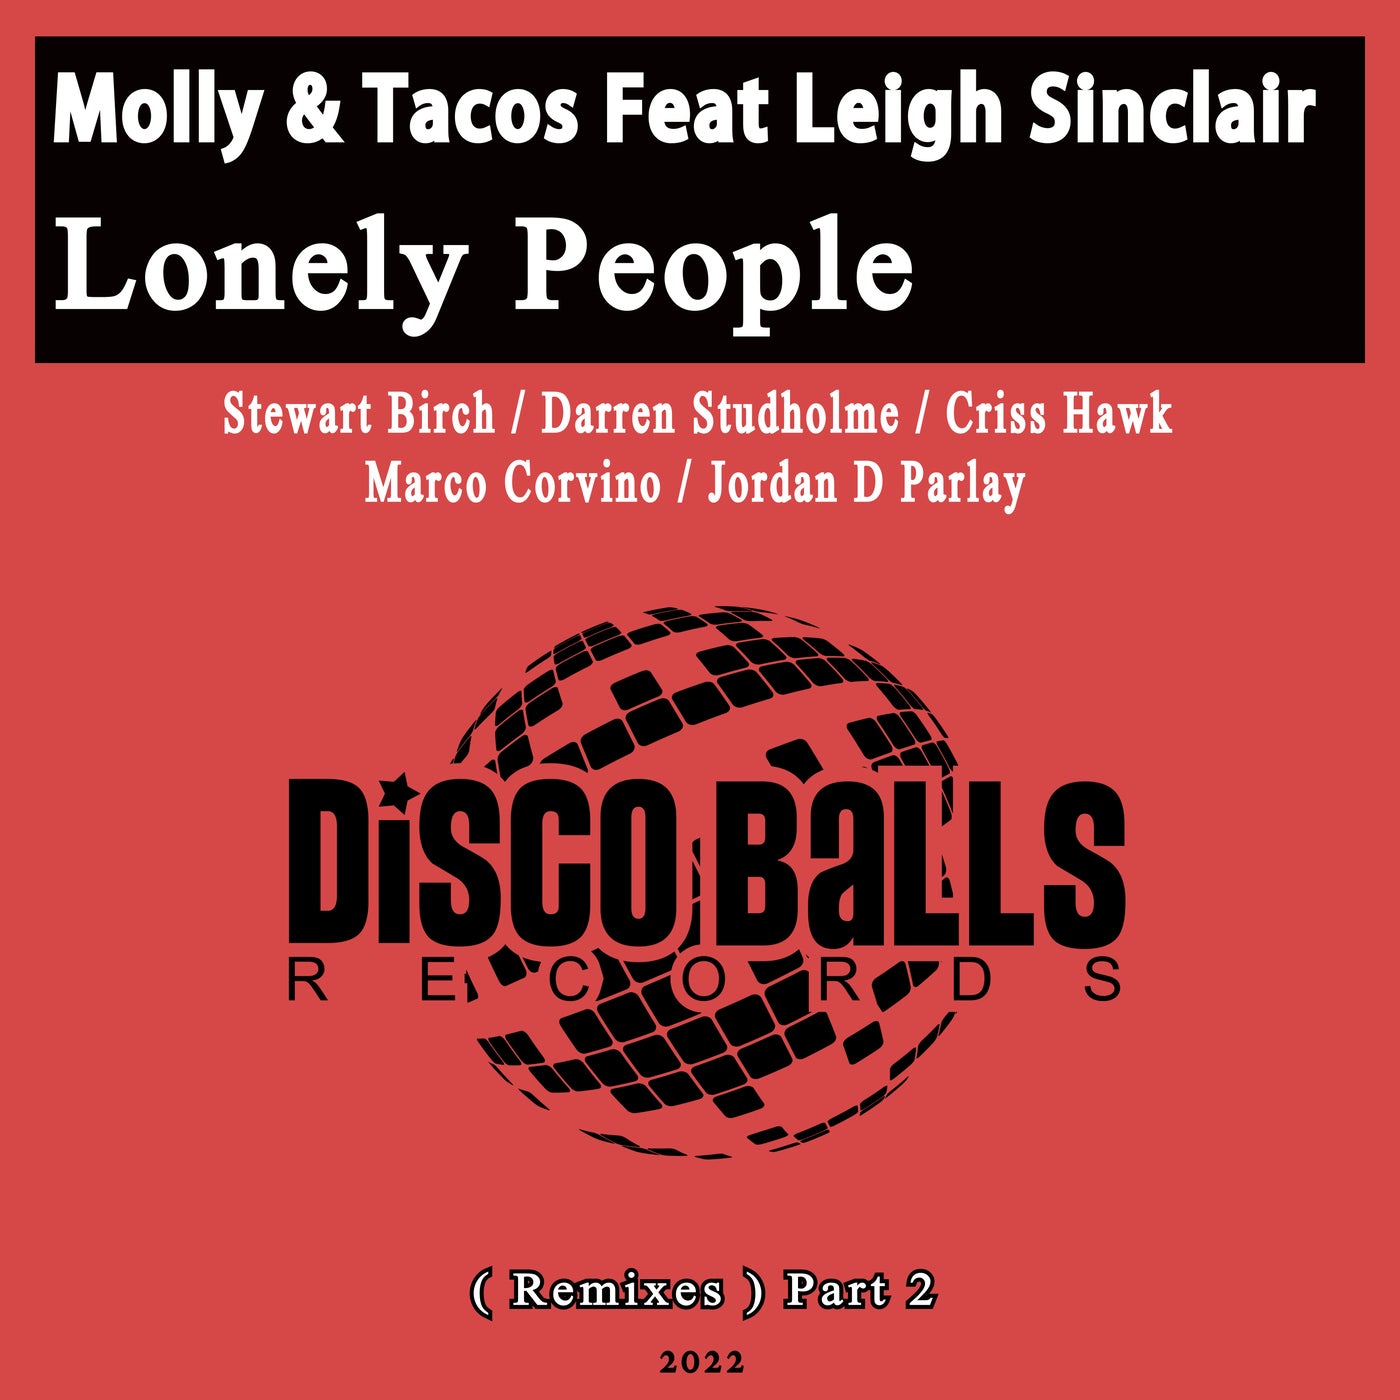 Lonely People (Remixes) Part 2